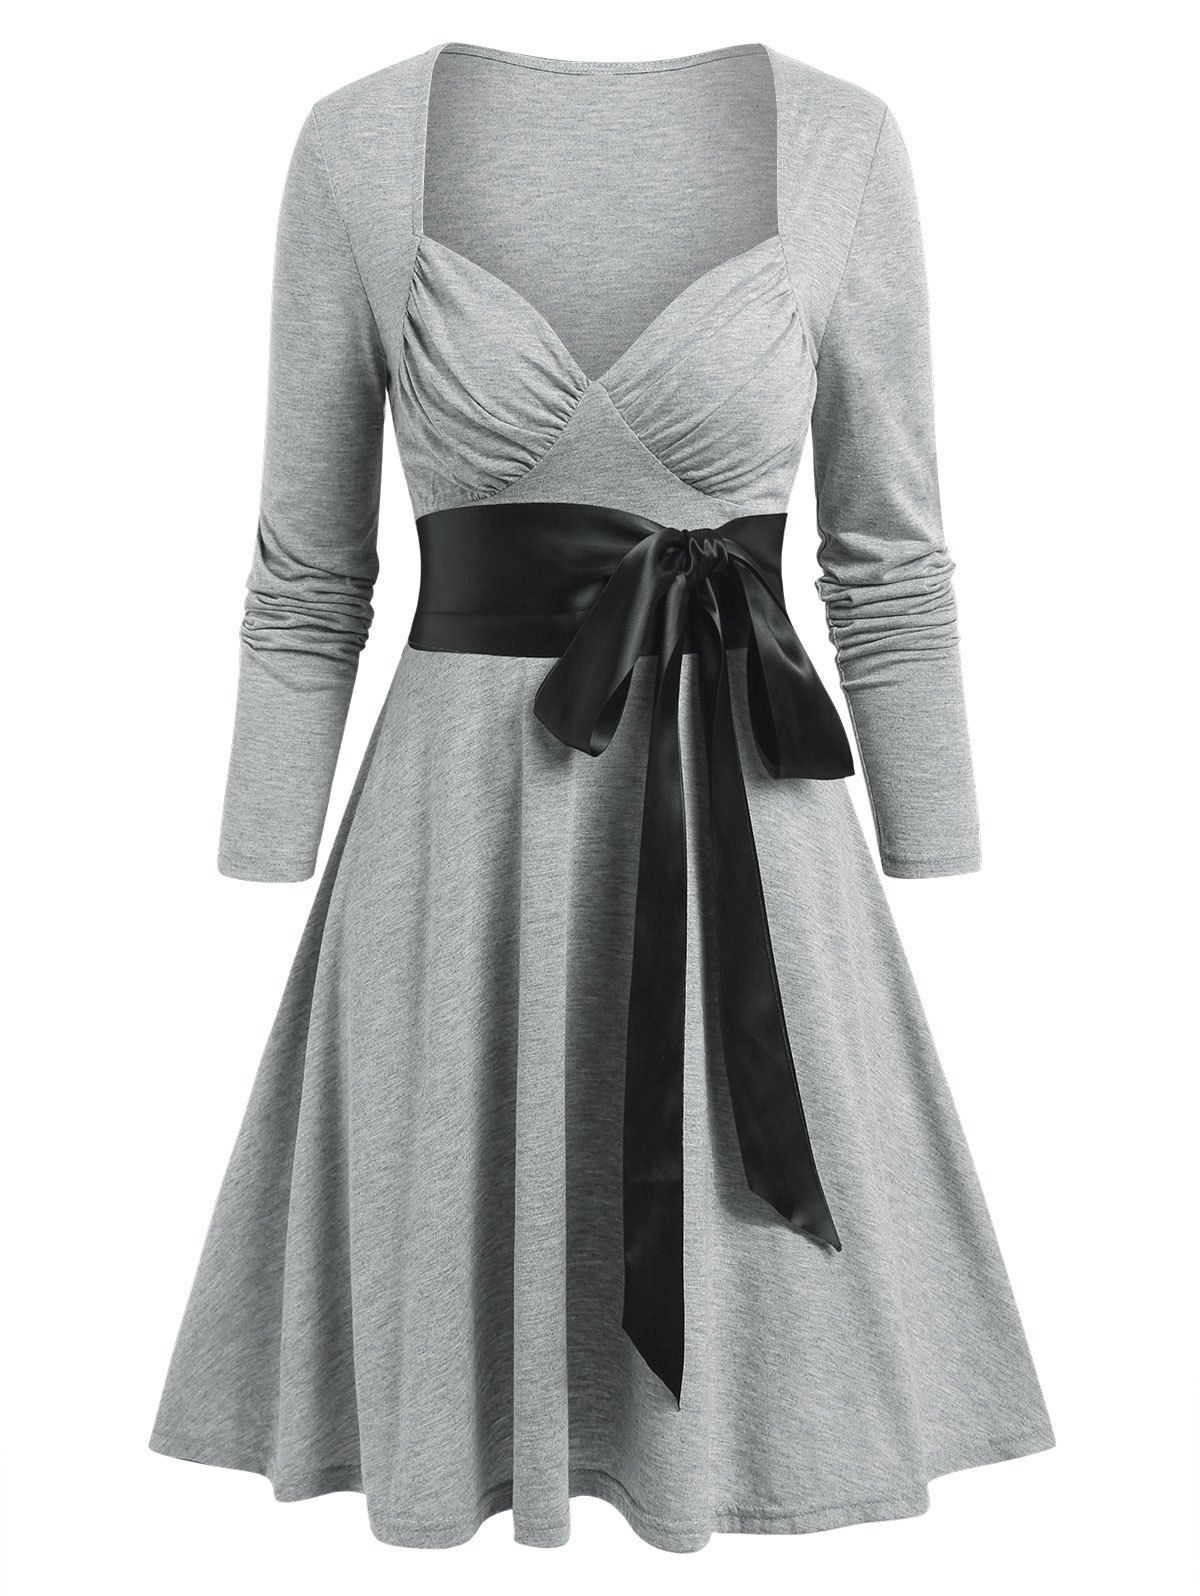 Ruched Bust Heathered Belted Dress - LIGHT GRAY L